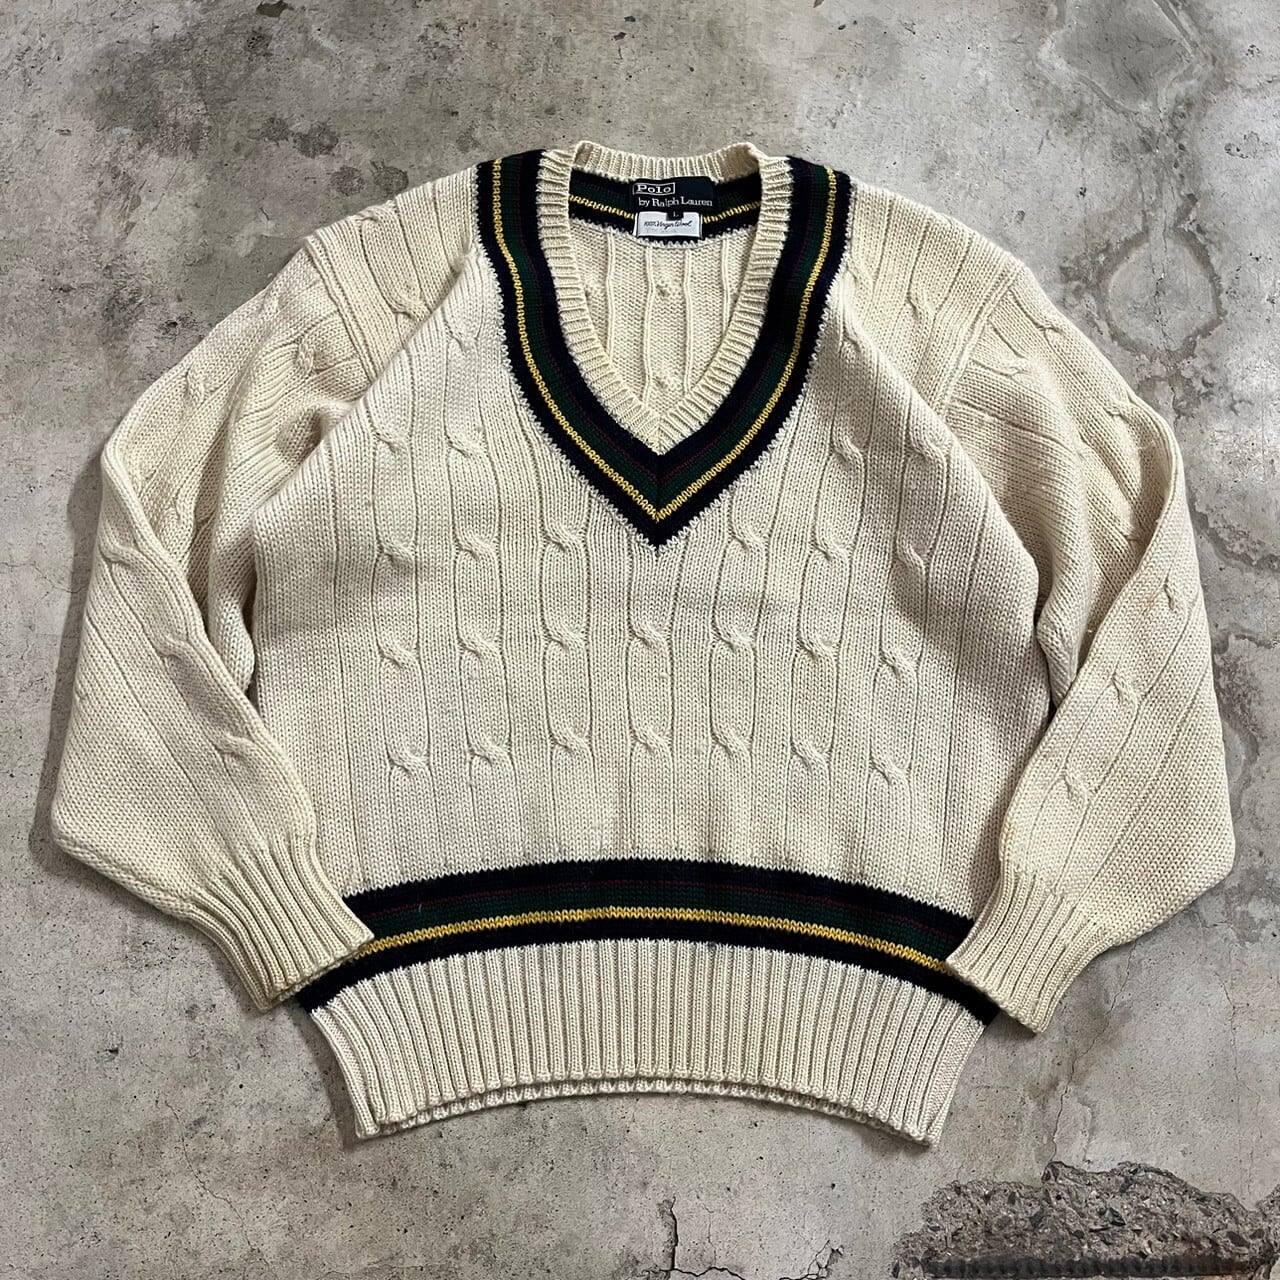 Polo Ralph Lauren〗90's Vneck wool cable knit sweater /ポロラルフ